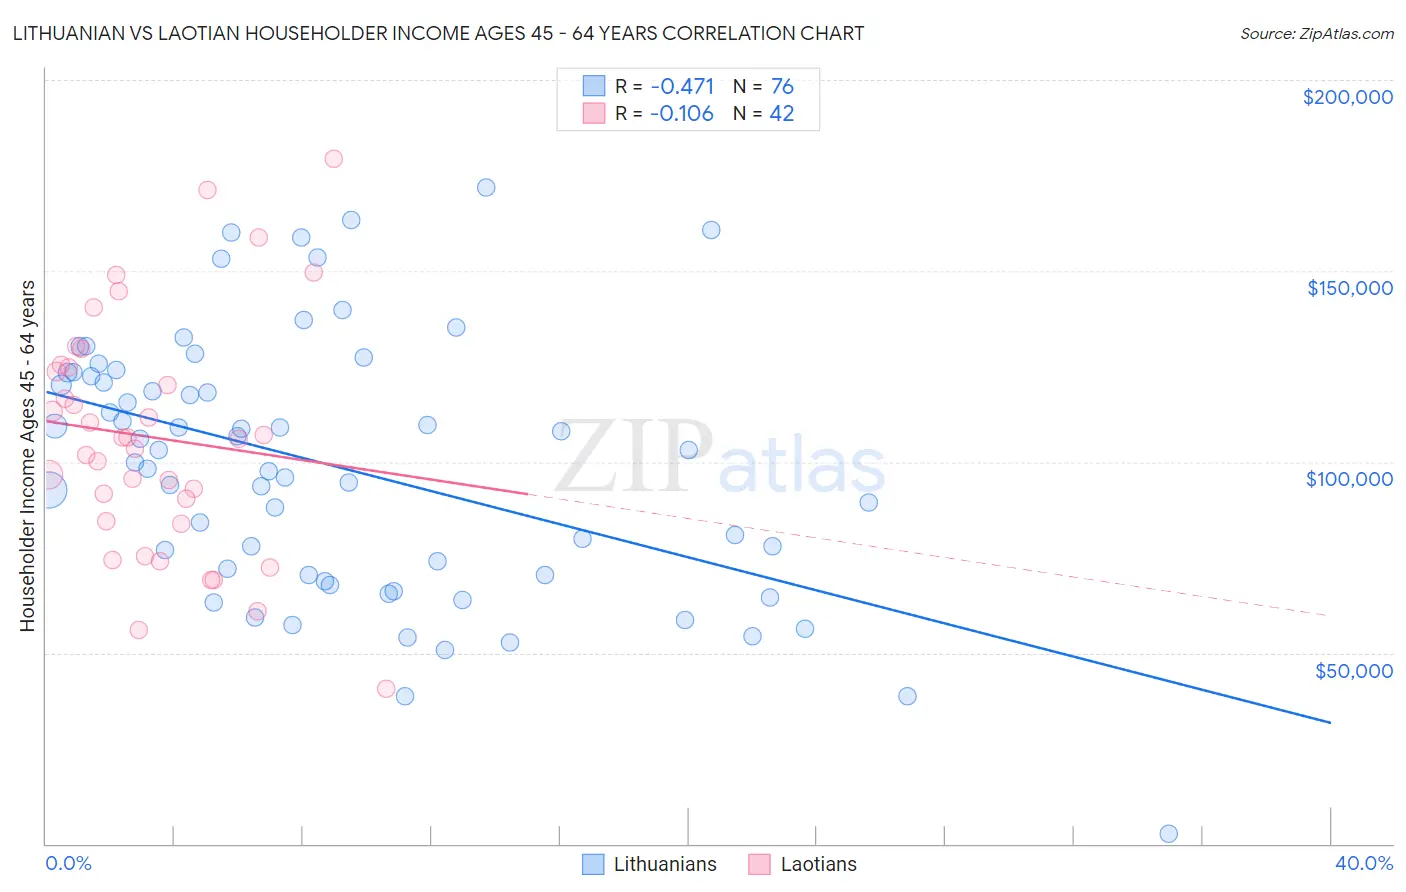 Lithuanian vs Laotian Householder Income Ages 45 - 64 years